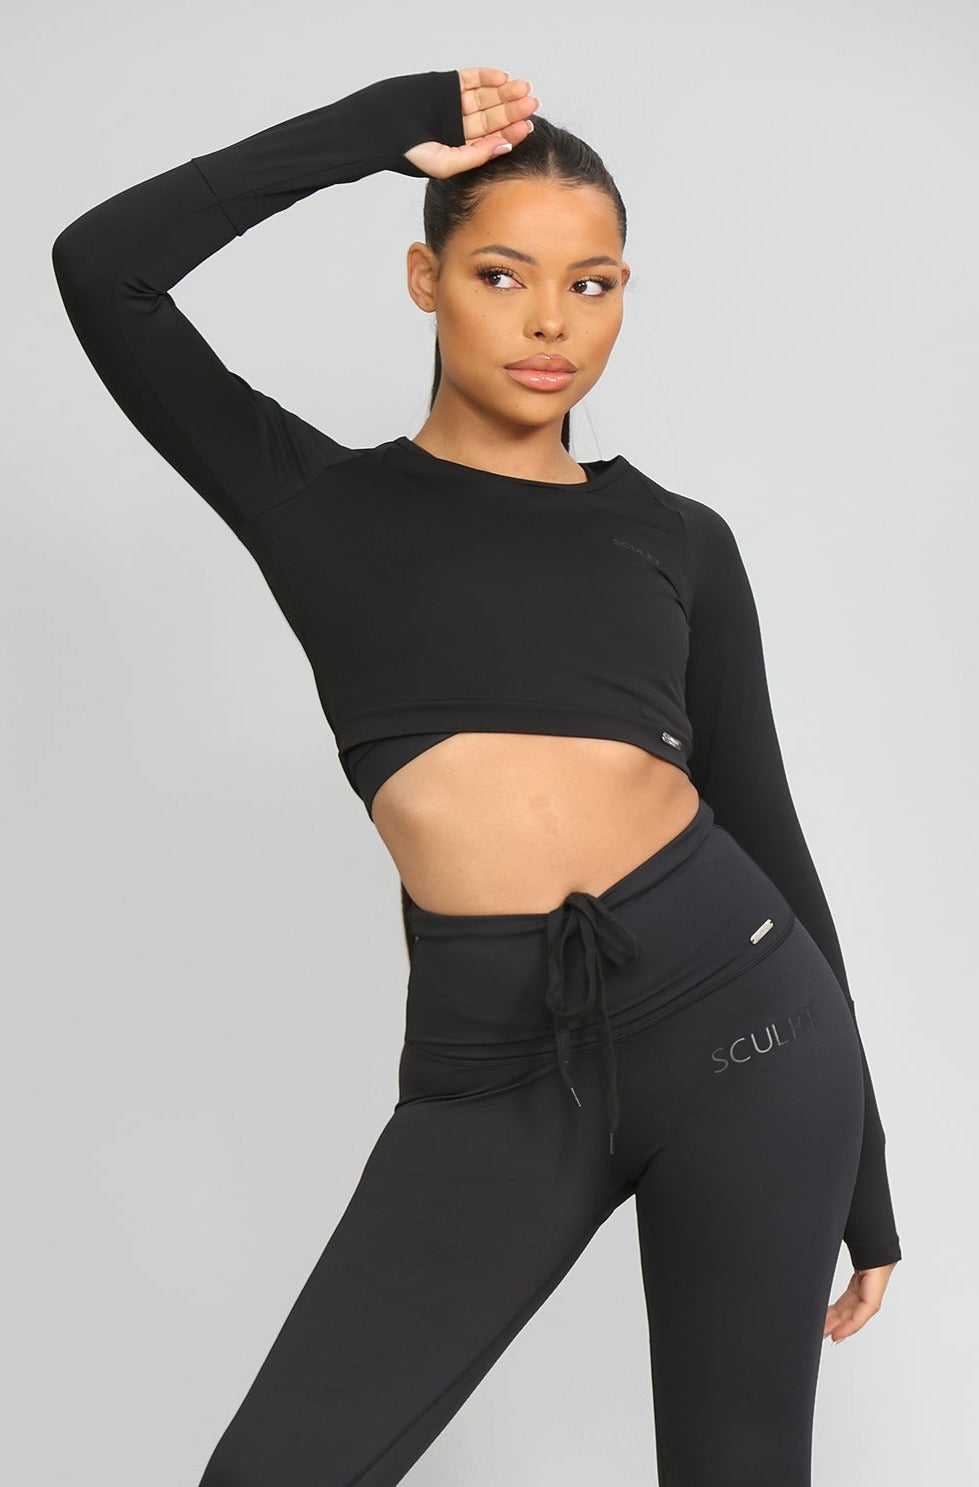 50% Off Sculpt Activewear Coupon Code: (15 active) March 2024